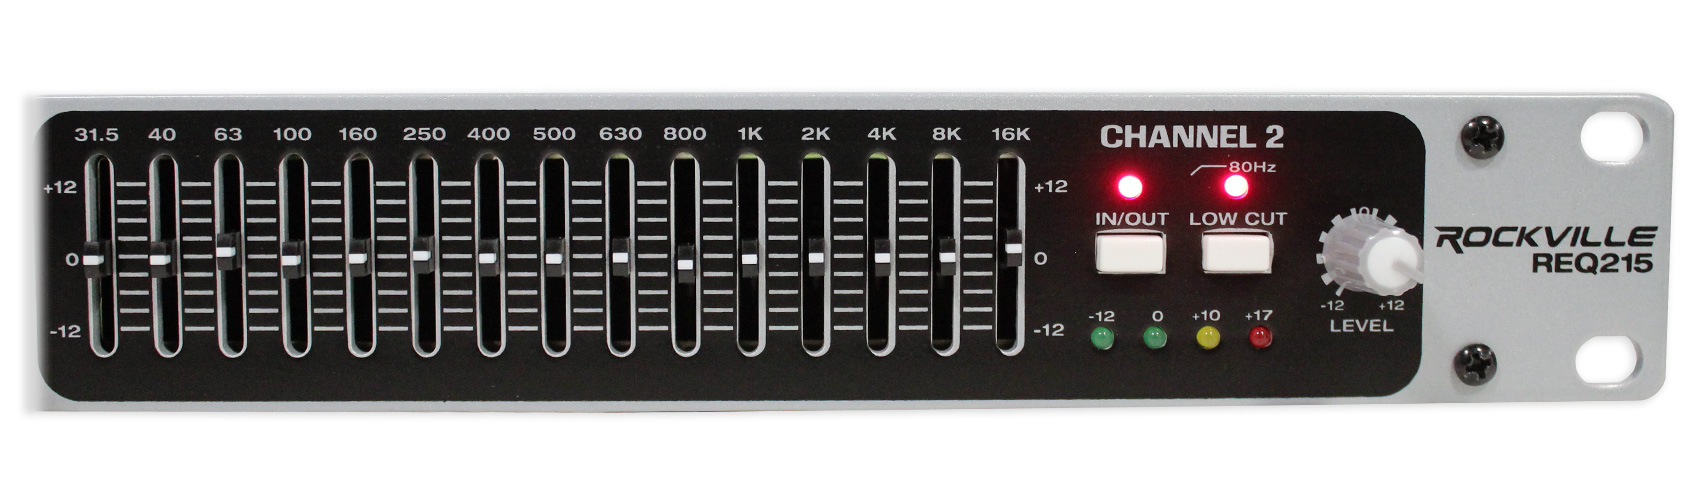 Rockville REQ215 Dual 15 Band 1/3 Octave Graphic Equalizer With Sub